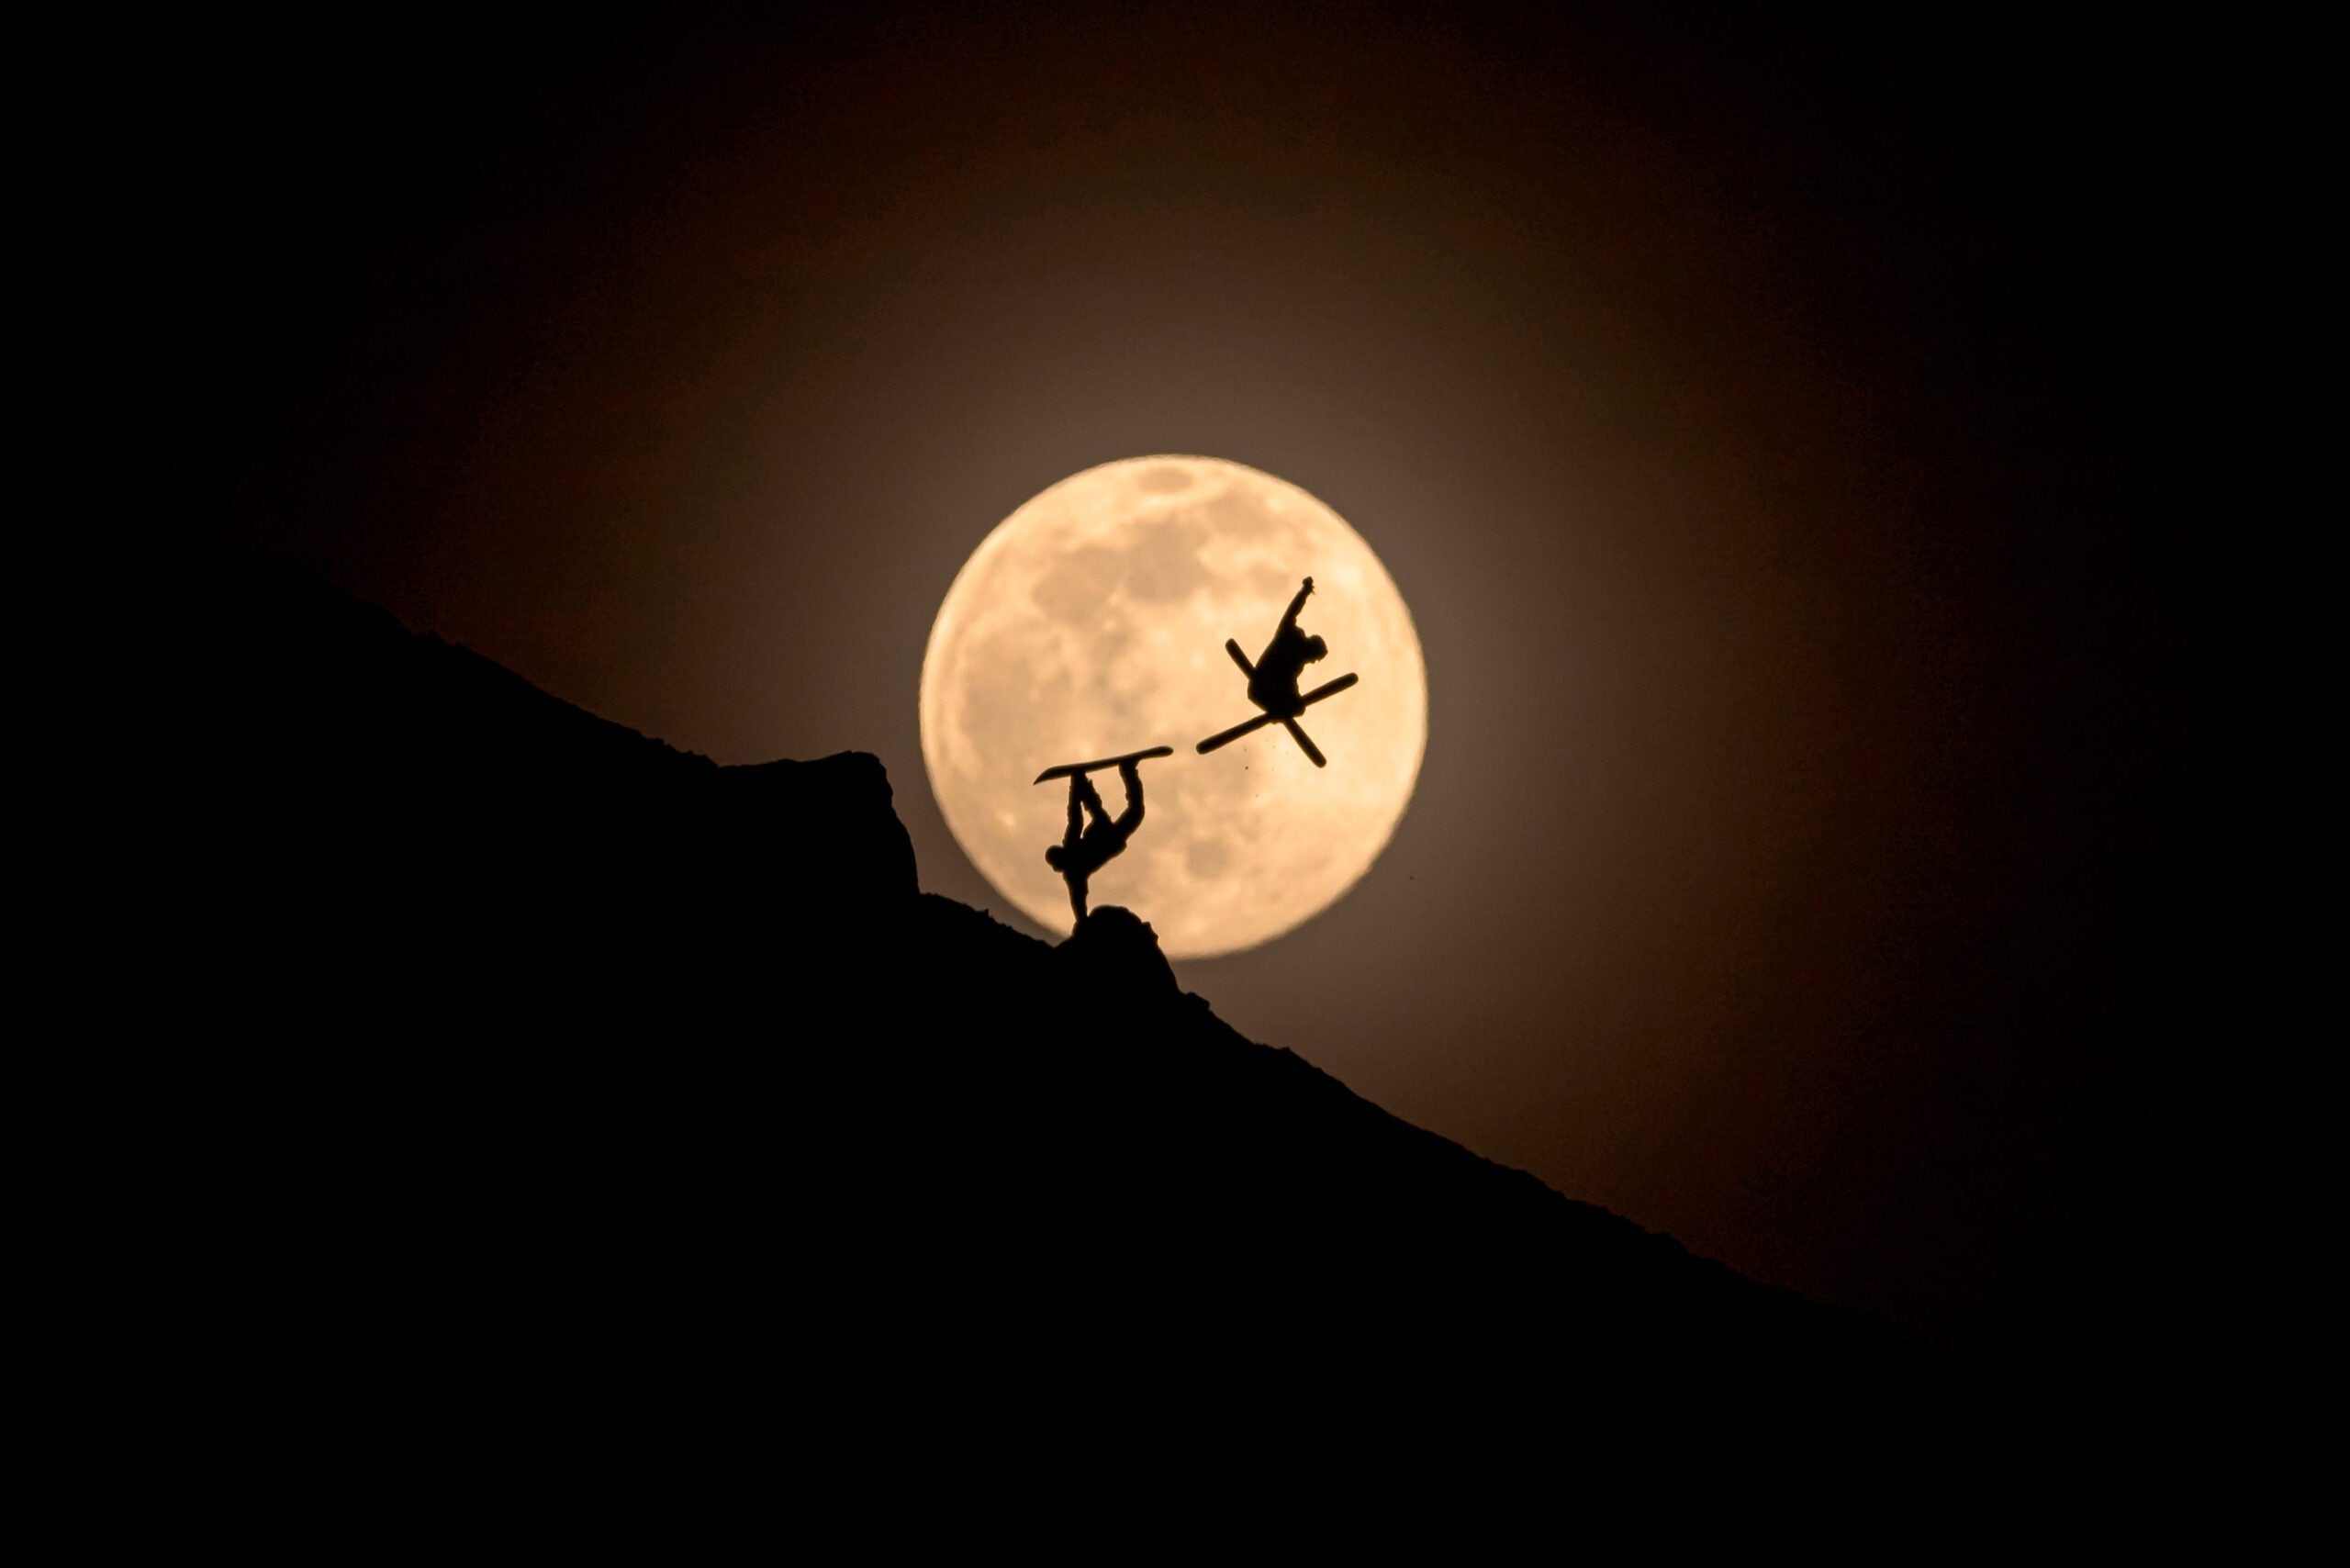 Yhabril (Spain) won the Best of Instagram category (photography) for his photo of a skier and snowboarder silhouetted against the moon.